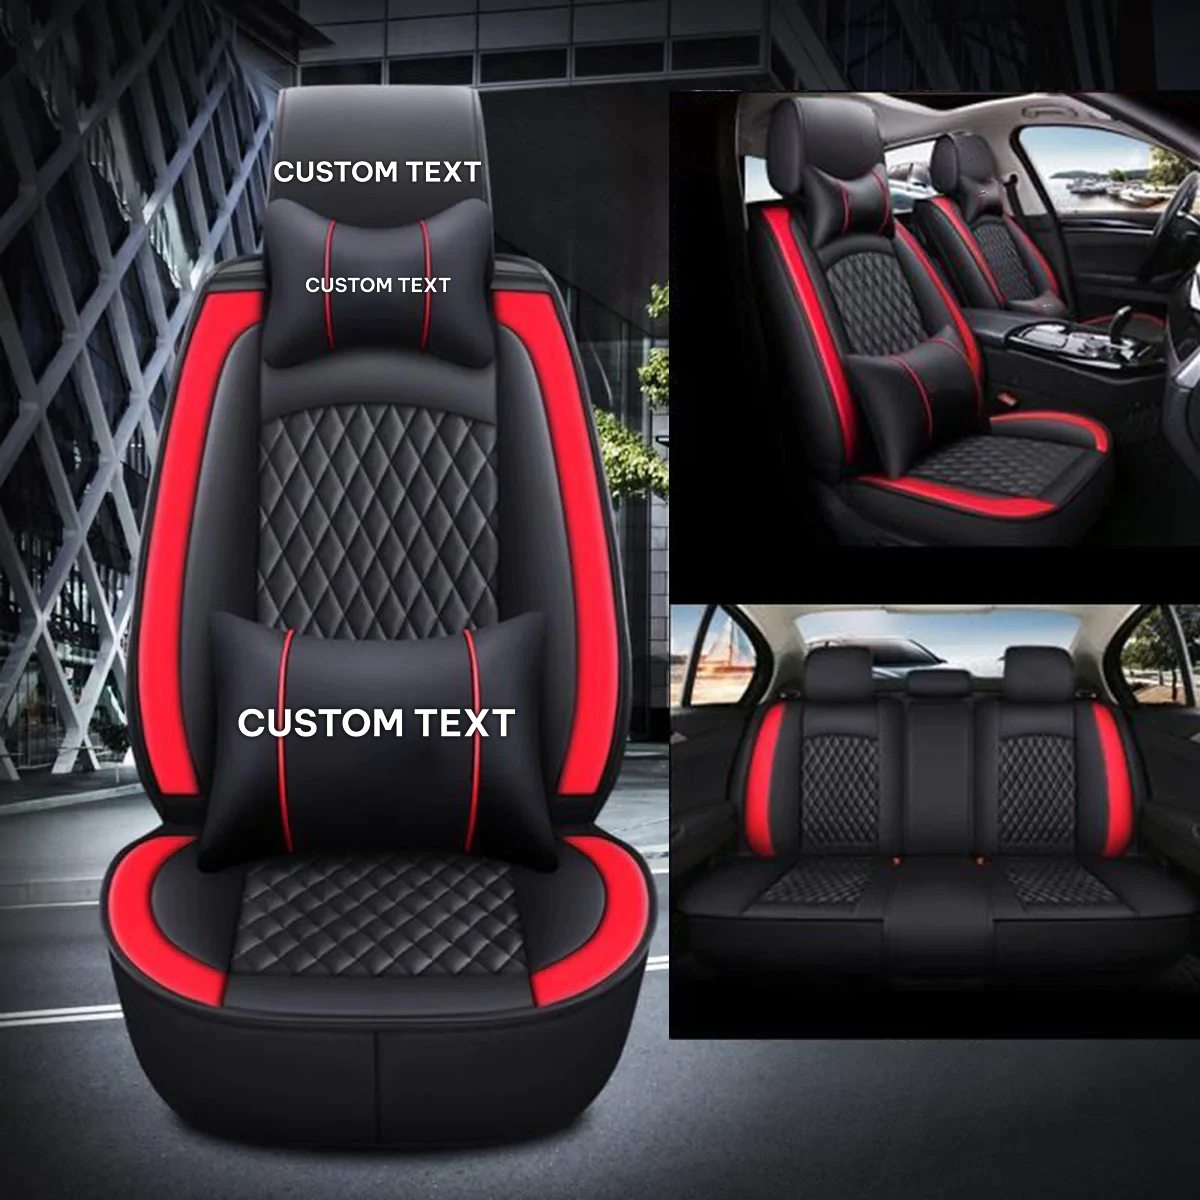 Custom Text For Seat Covers 5 Seats Full Set, Custom Fit For Your Cars, Leatherette Automotive Seat Cushion Protector Universal Fit, Vehicle Auto Interior Decor FJ13988